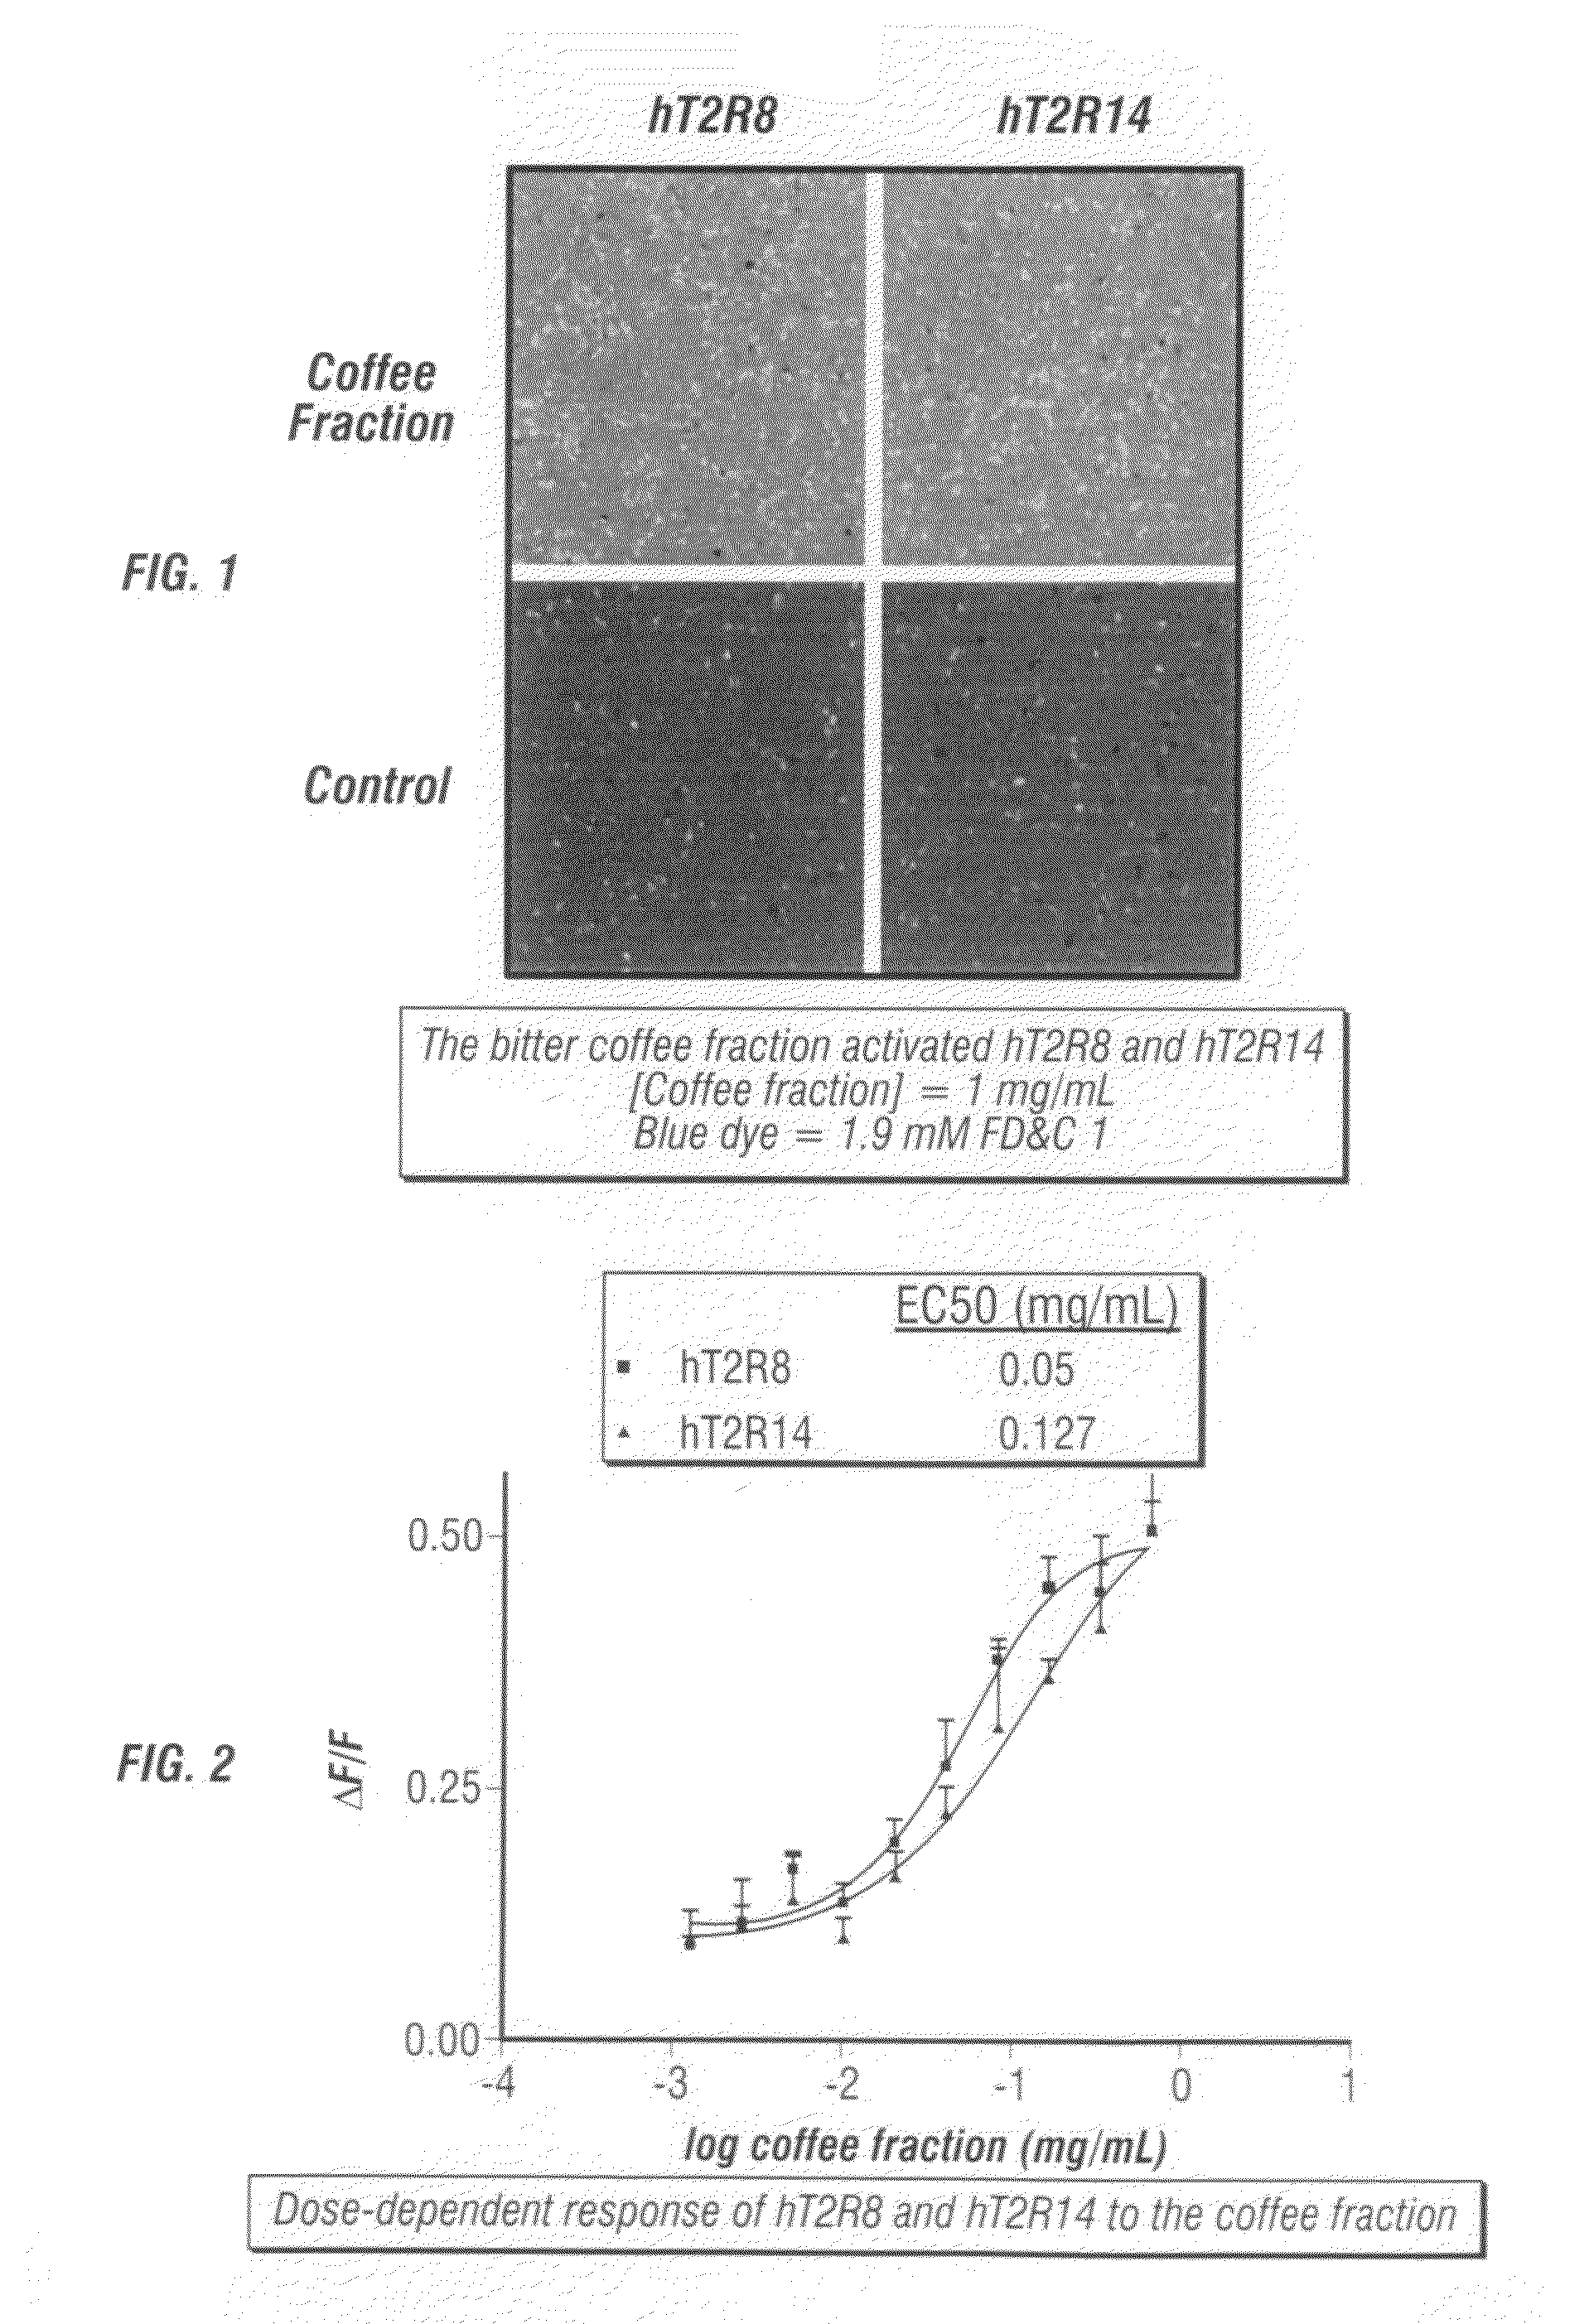 Identification of human T2R receptors that respond to bitter compounds that elicit the bitter taste in compositions, and the use thereof in assays to identify compounds that inhibit (block) bitter taste in composition and use thereof